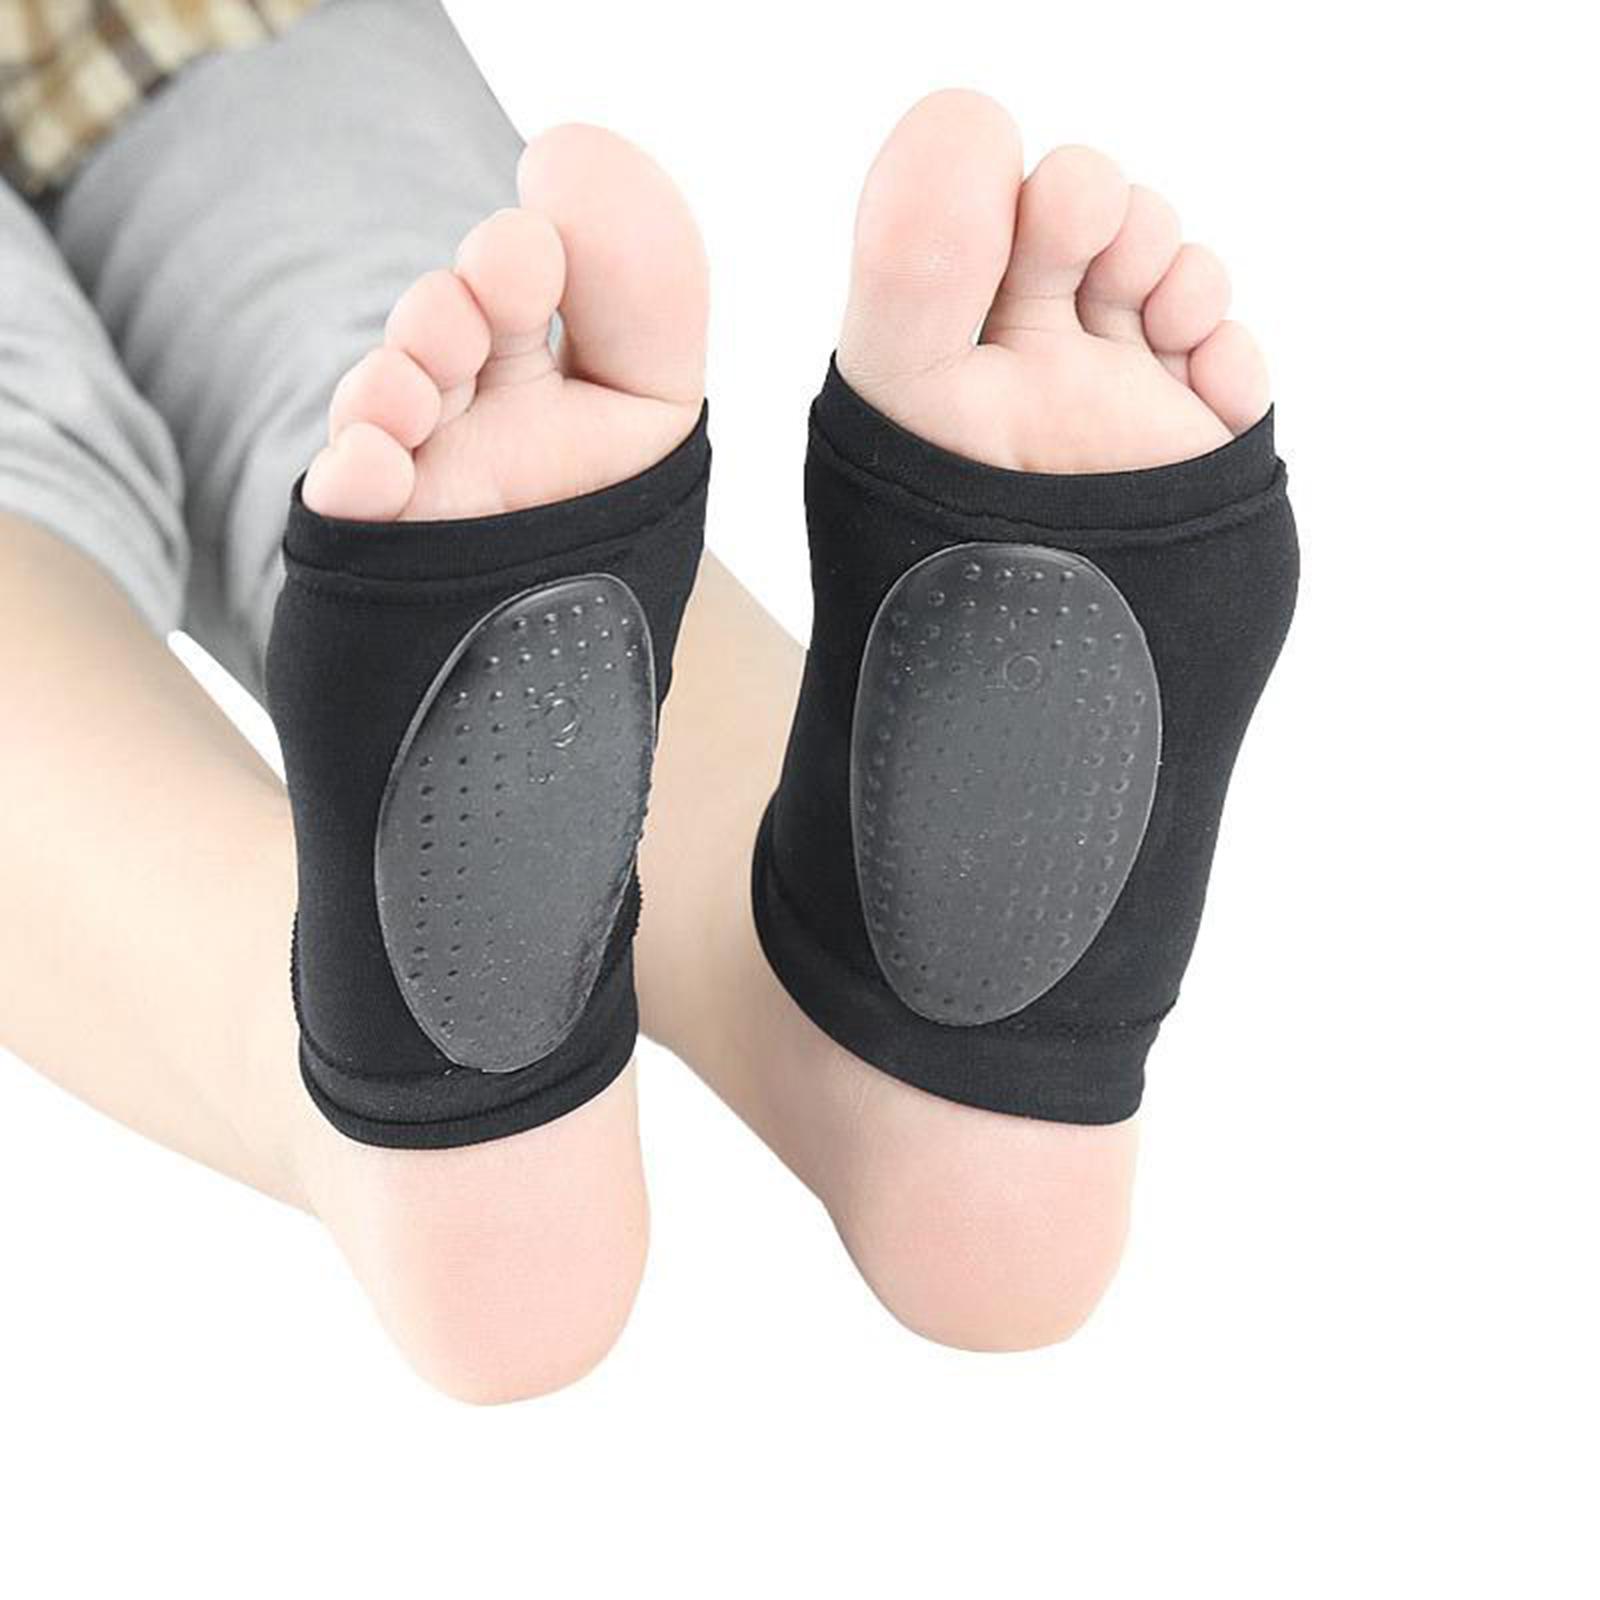 1 Pair Plantar Fasciitis Compression Arch Support Brace Pad for Flat Feet